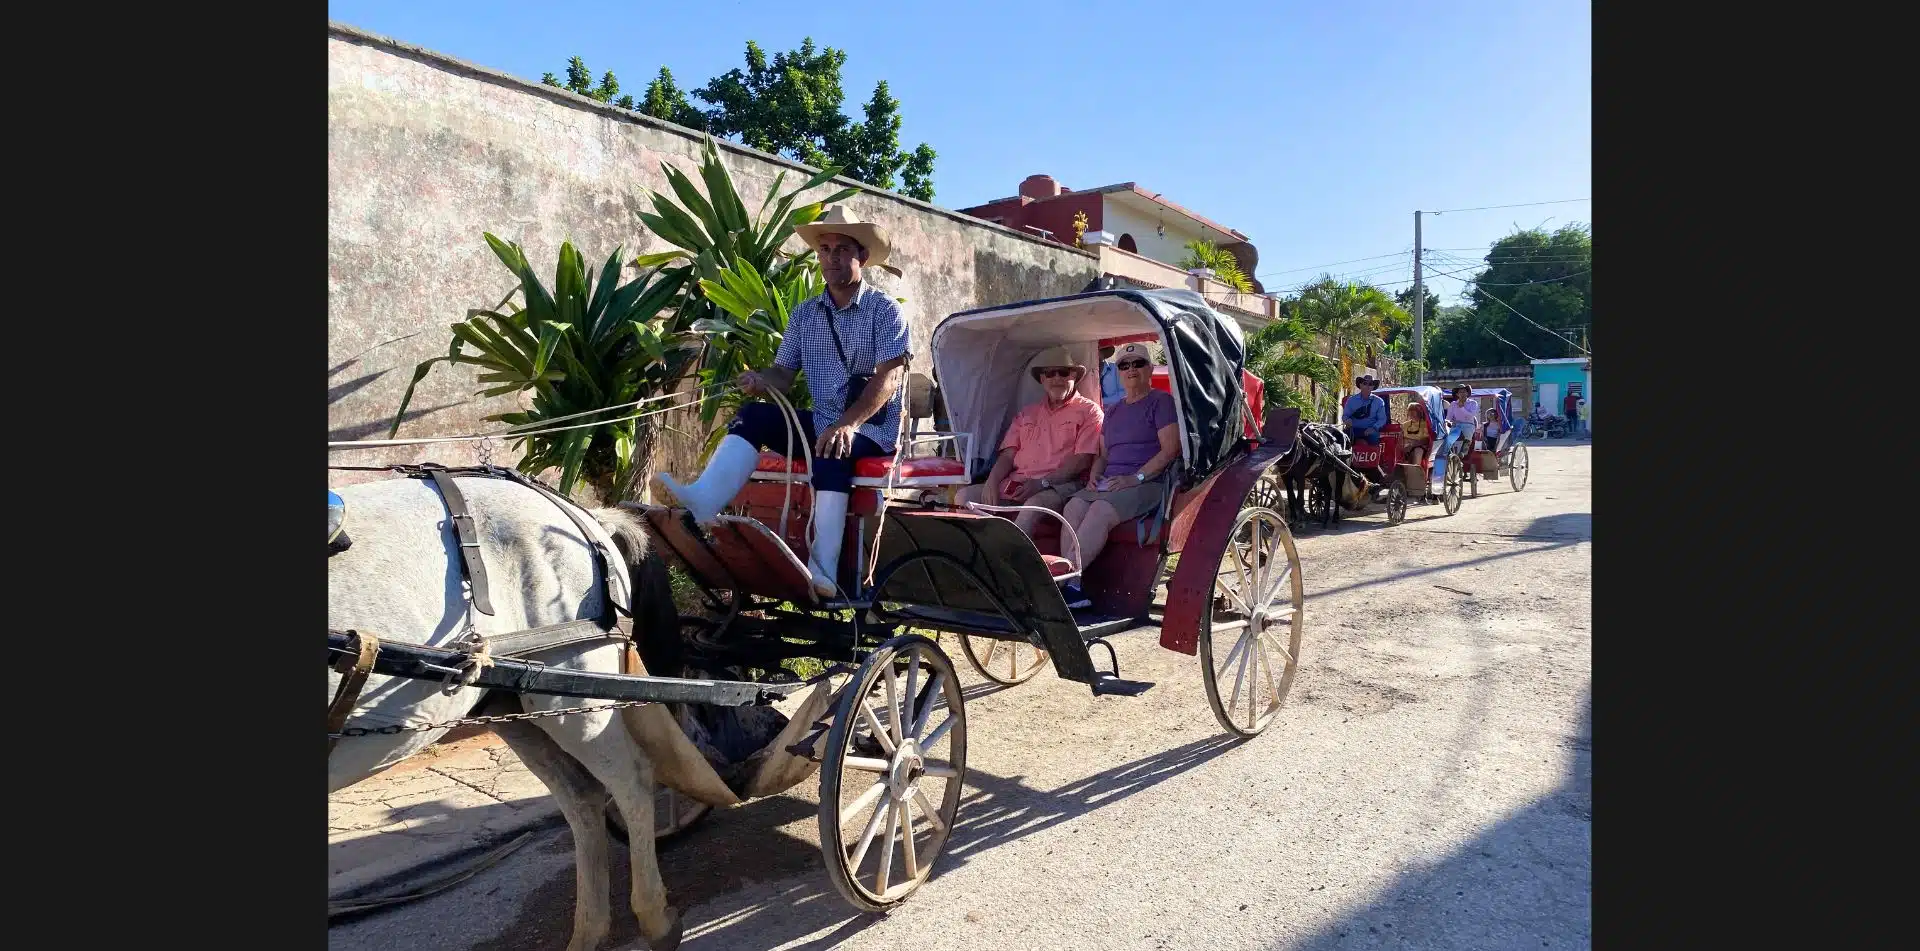 Clip clop on a horse and carriage ride on a guided tour of 500-year-old Trinidad